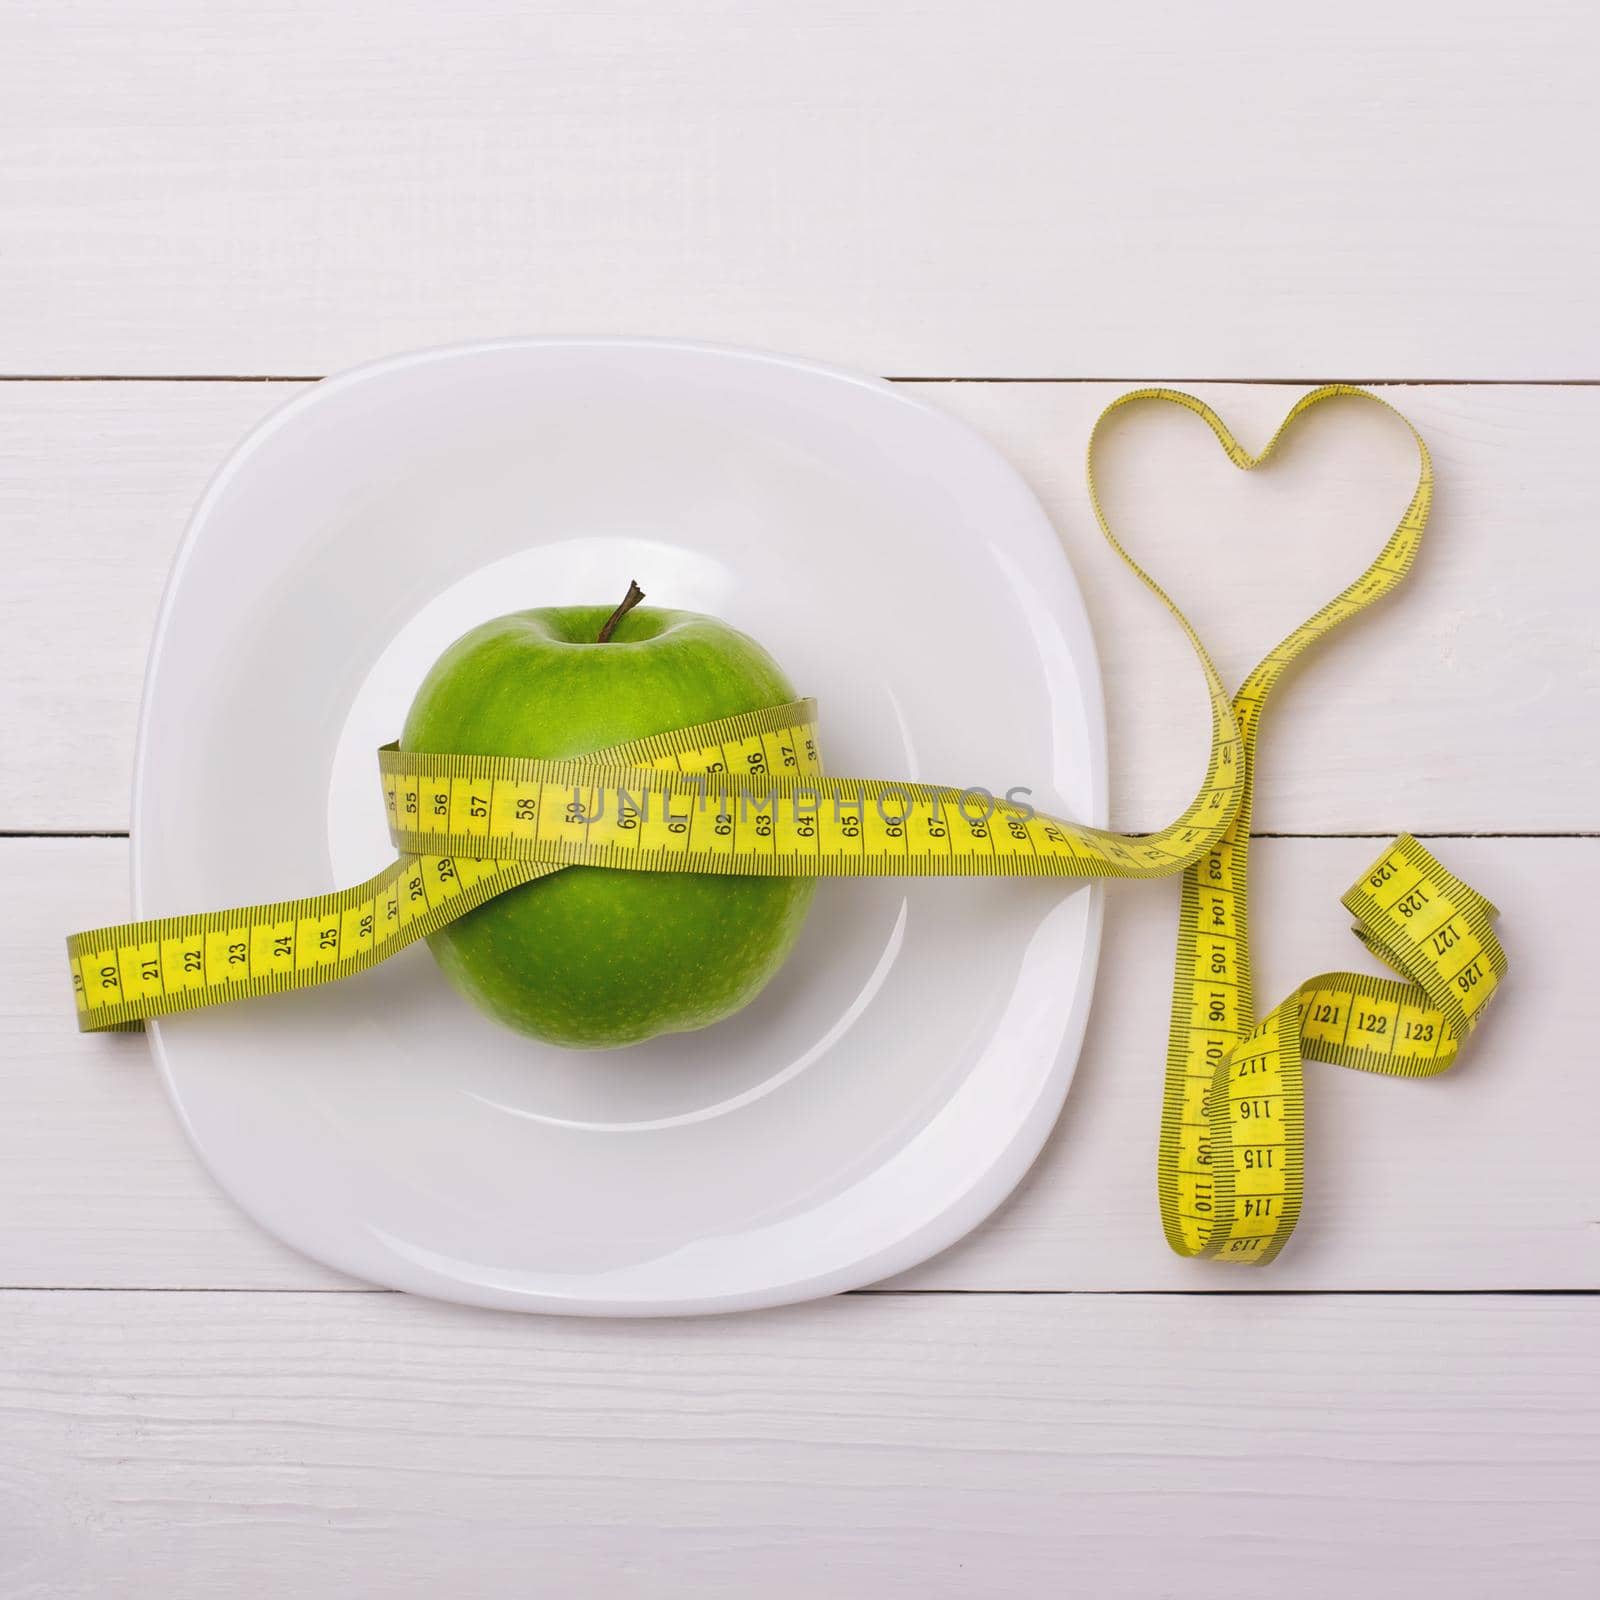 Apple and centimeter on the plate. Fitness healthy eating by alones